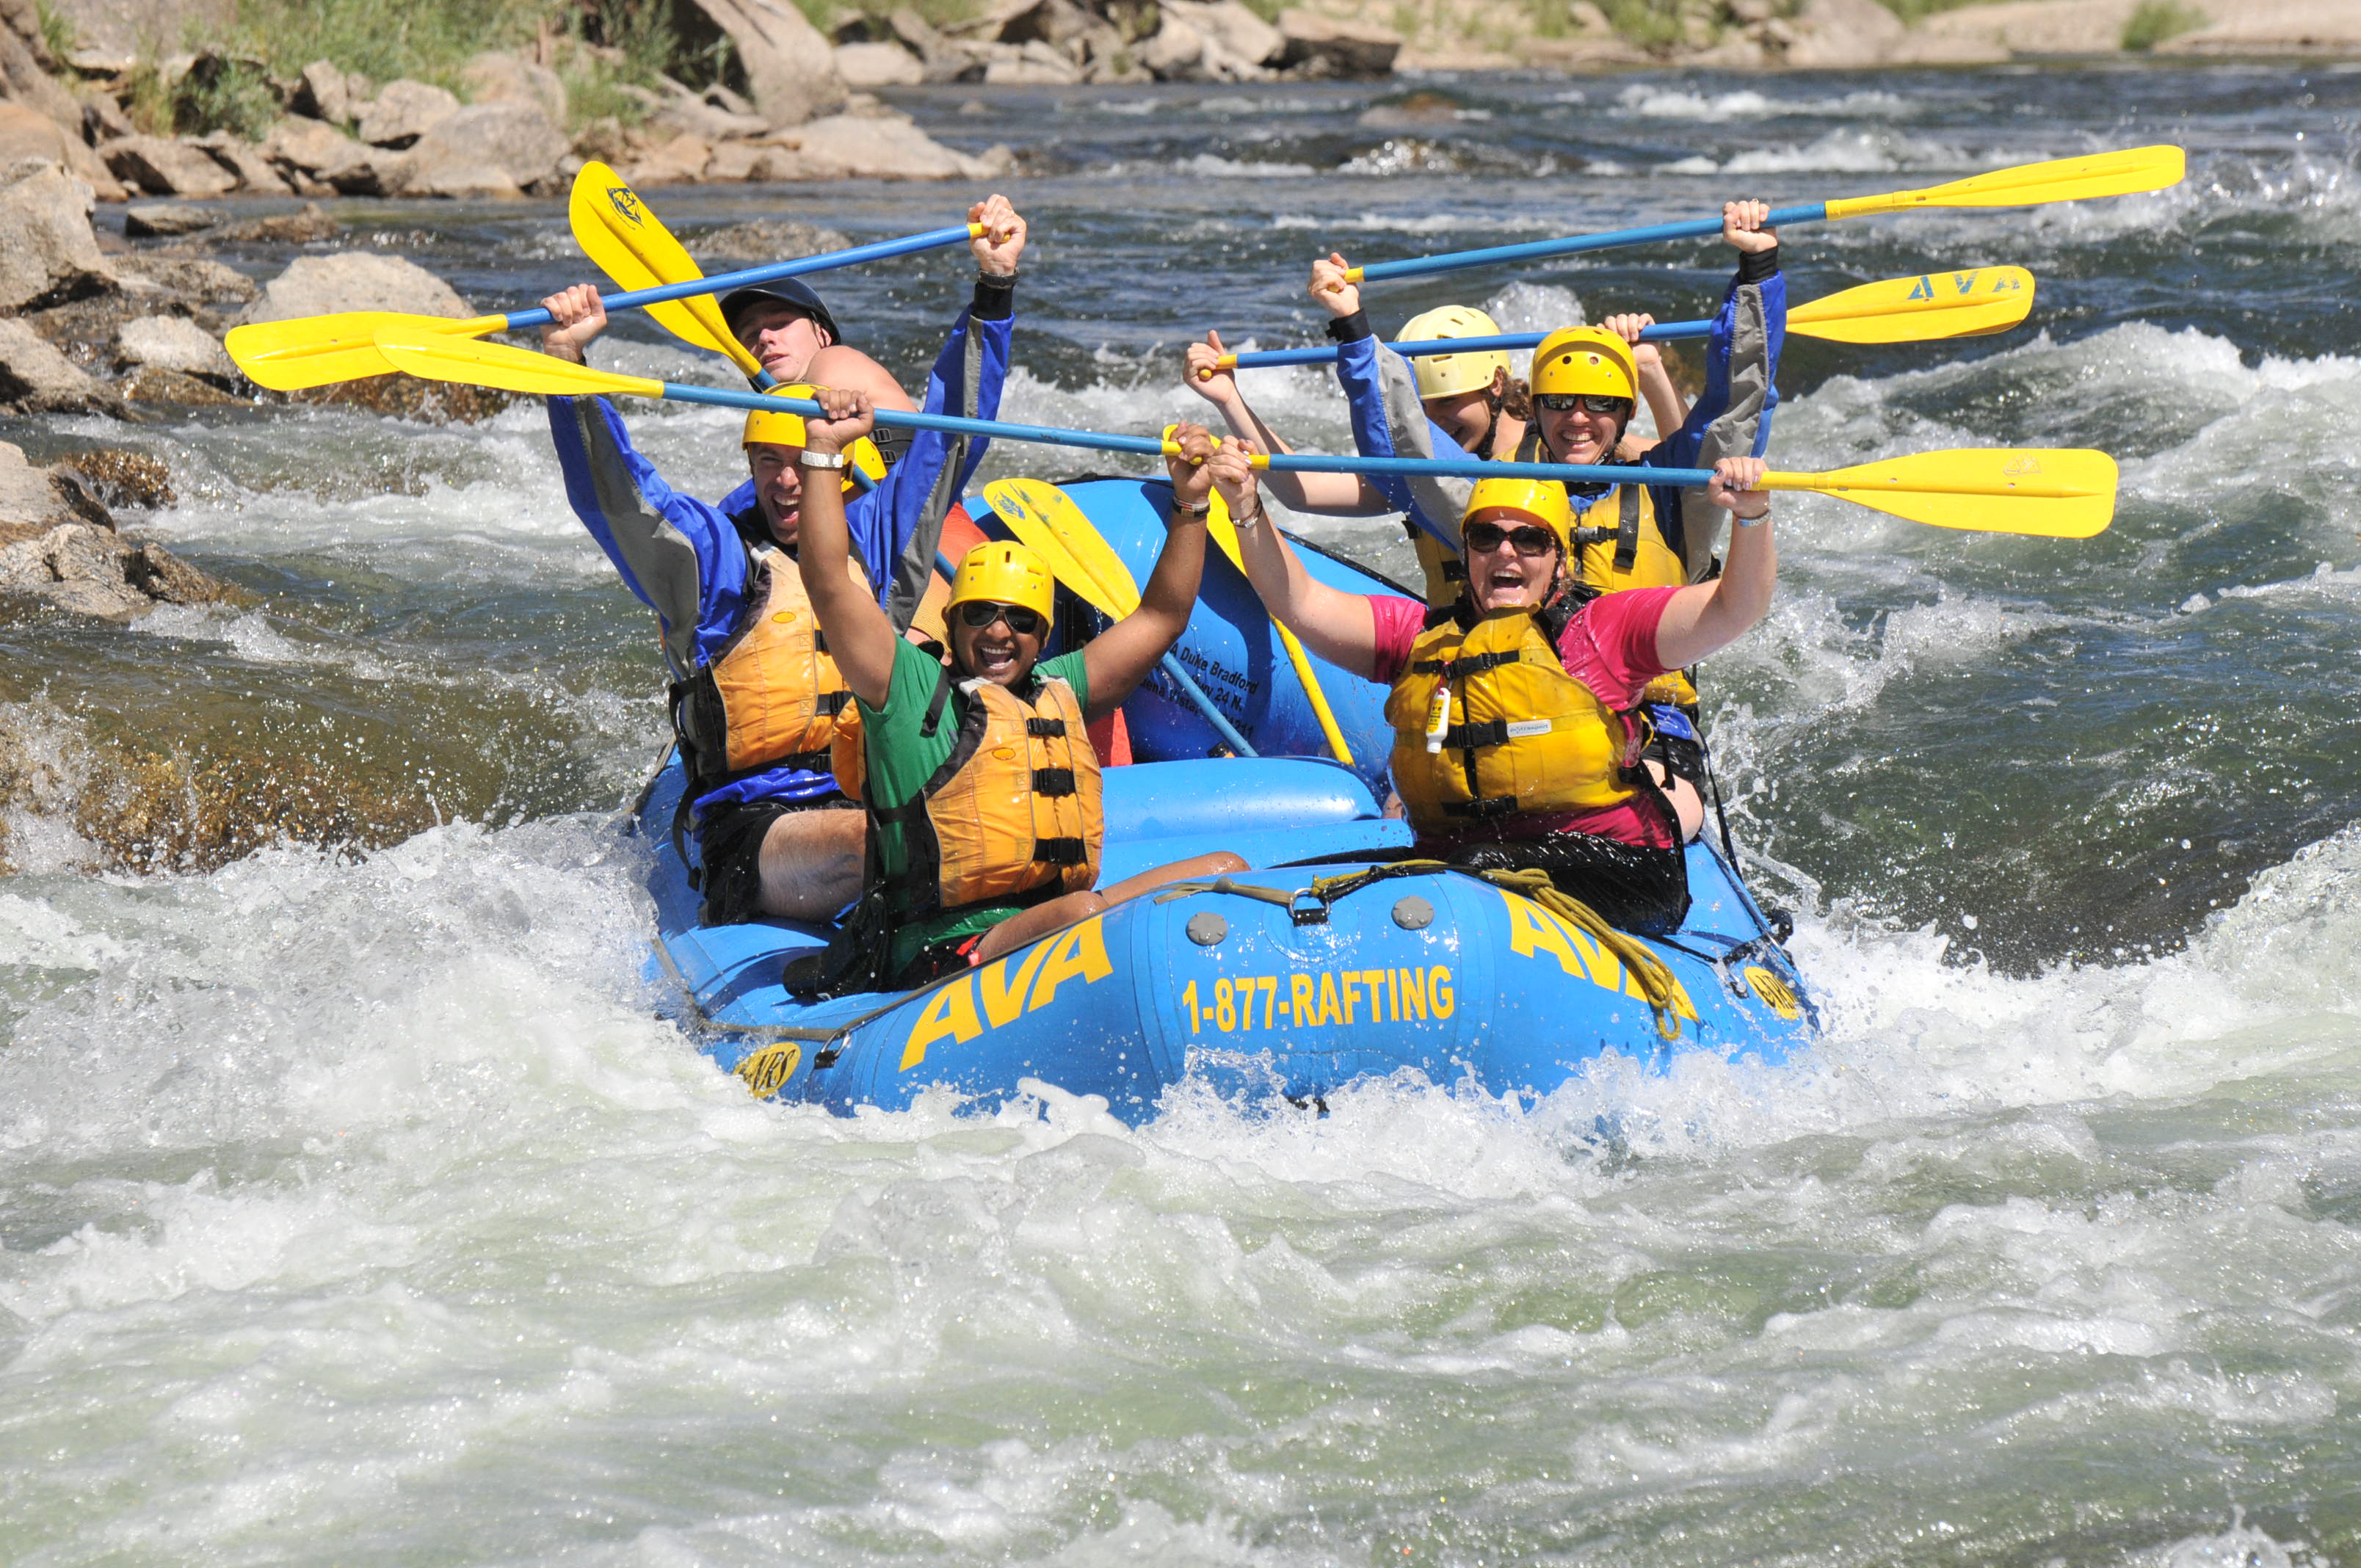 A group of whitewater rafters with their paddles up while going through a rapid